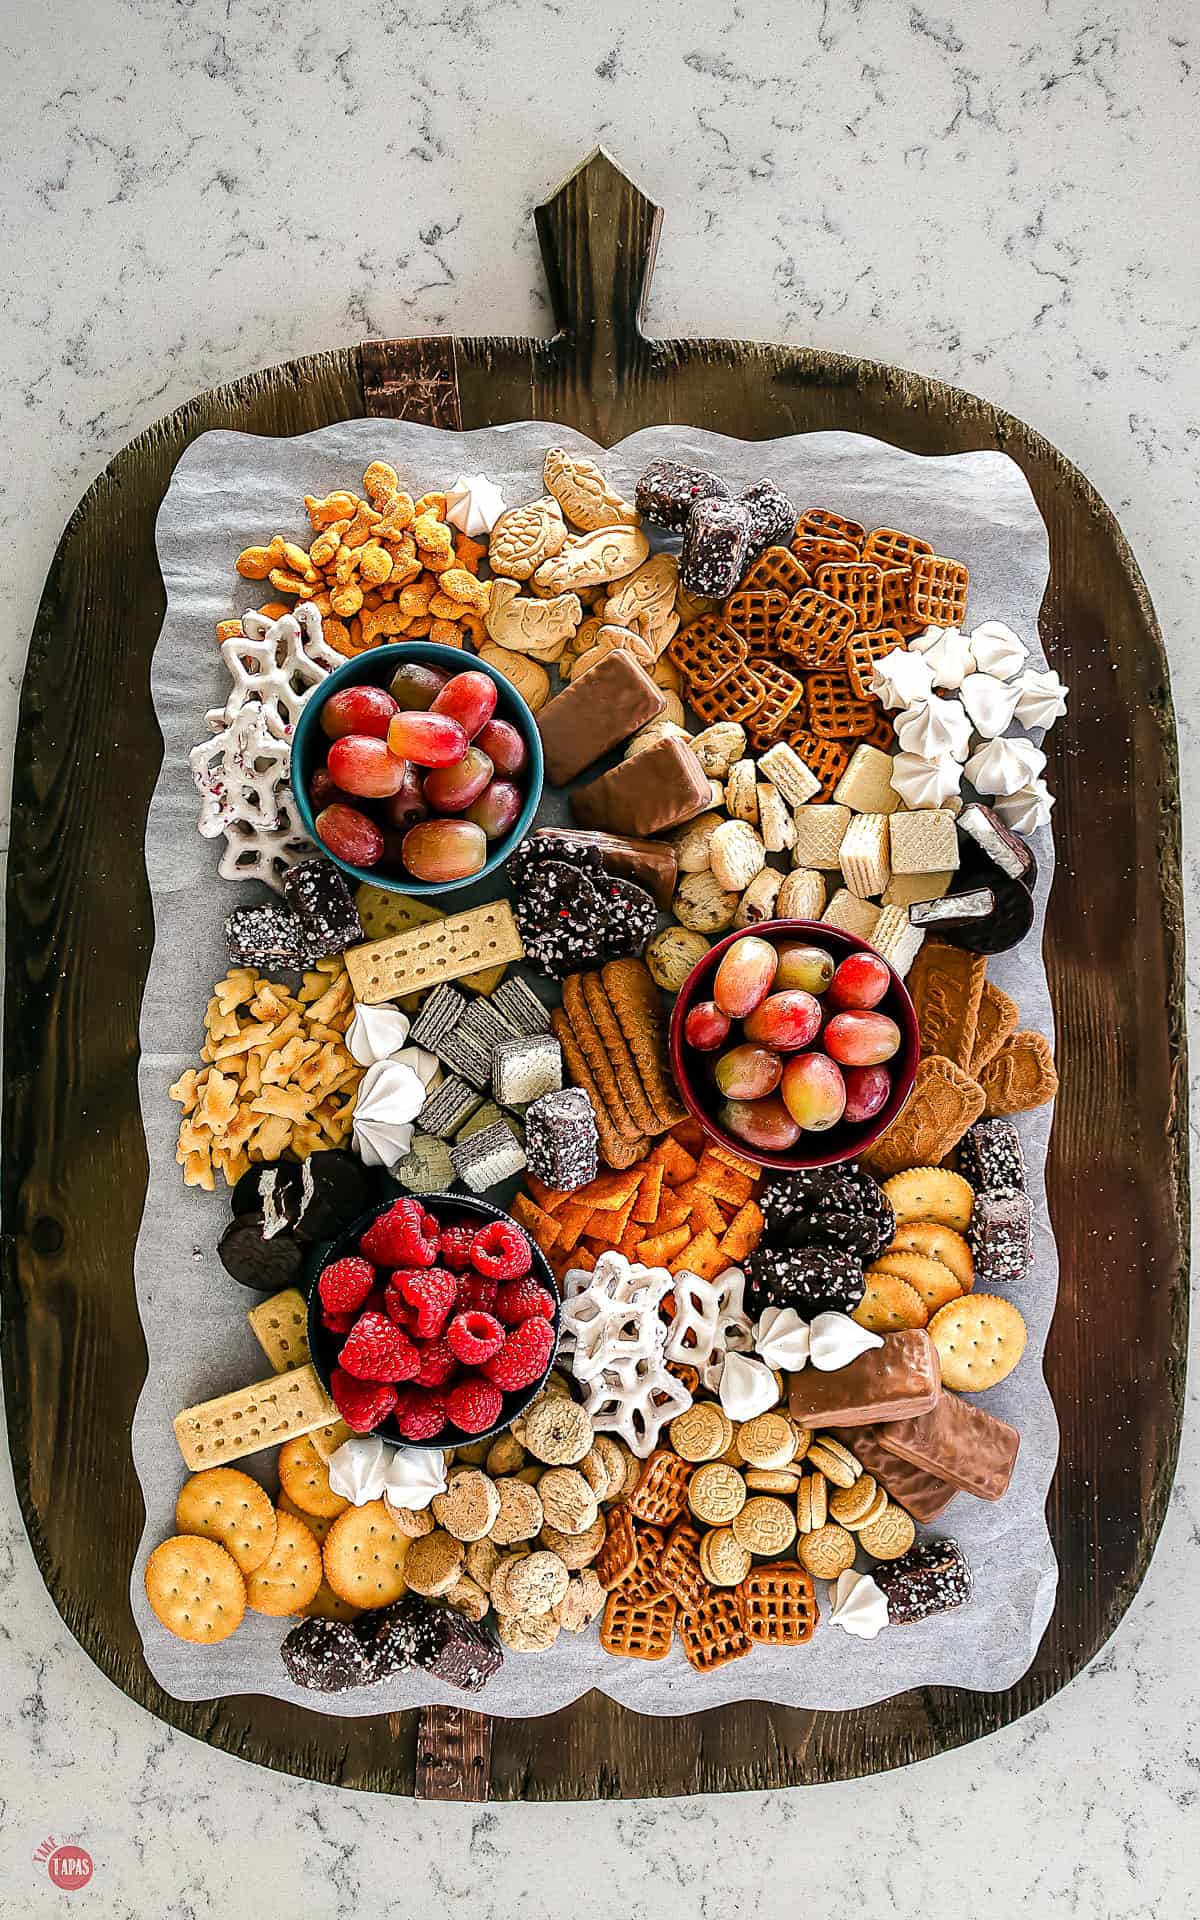 almost complete snack platter